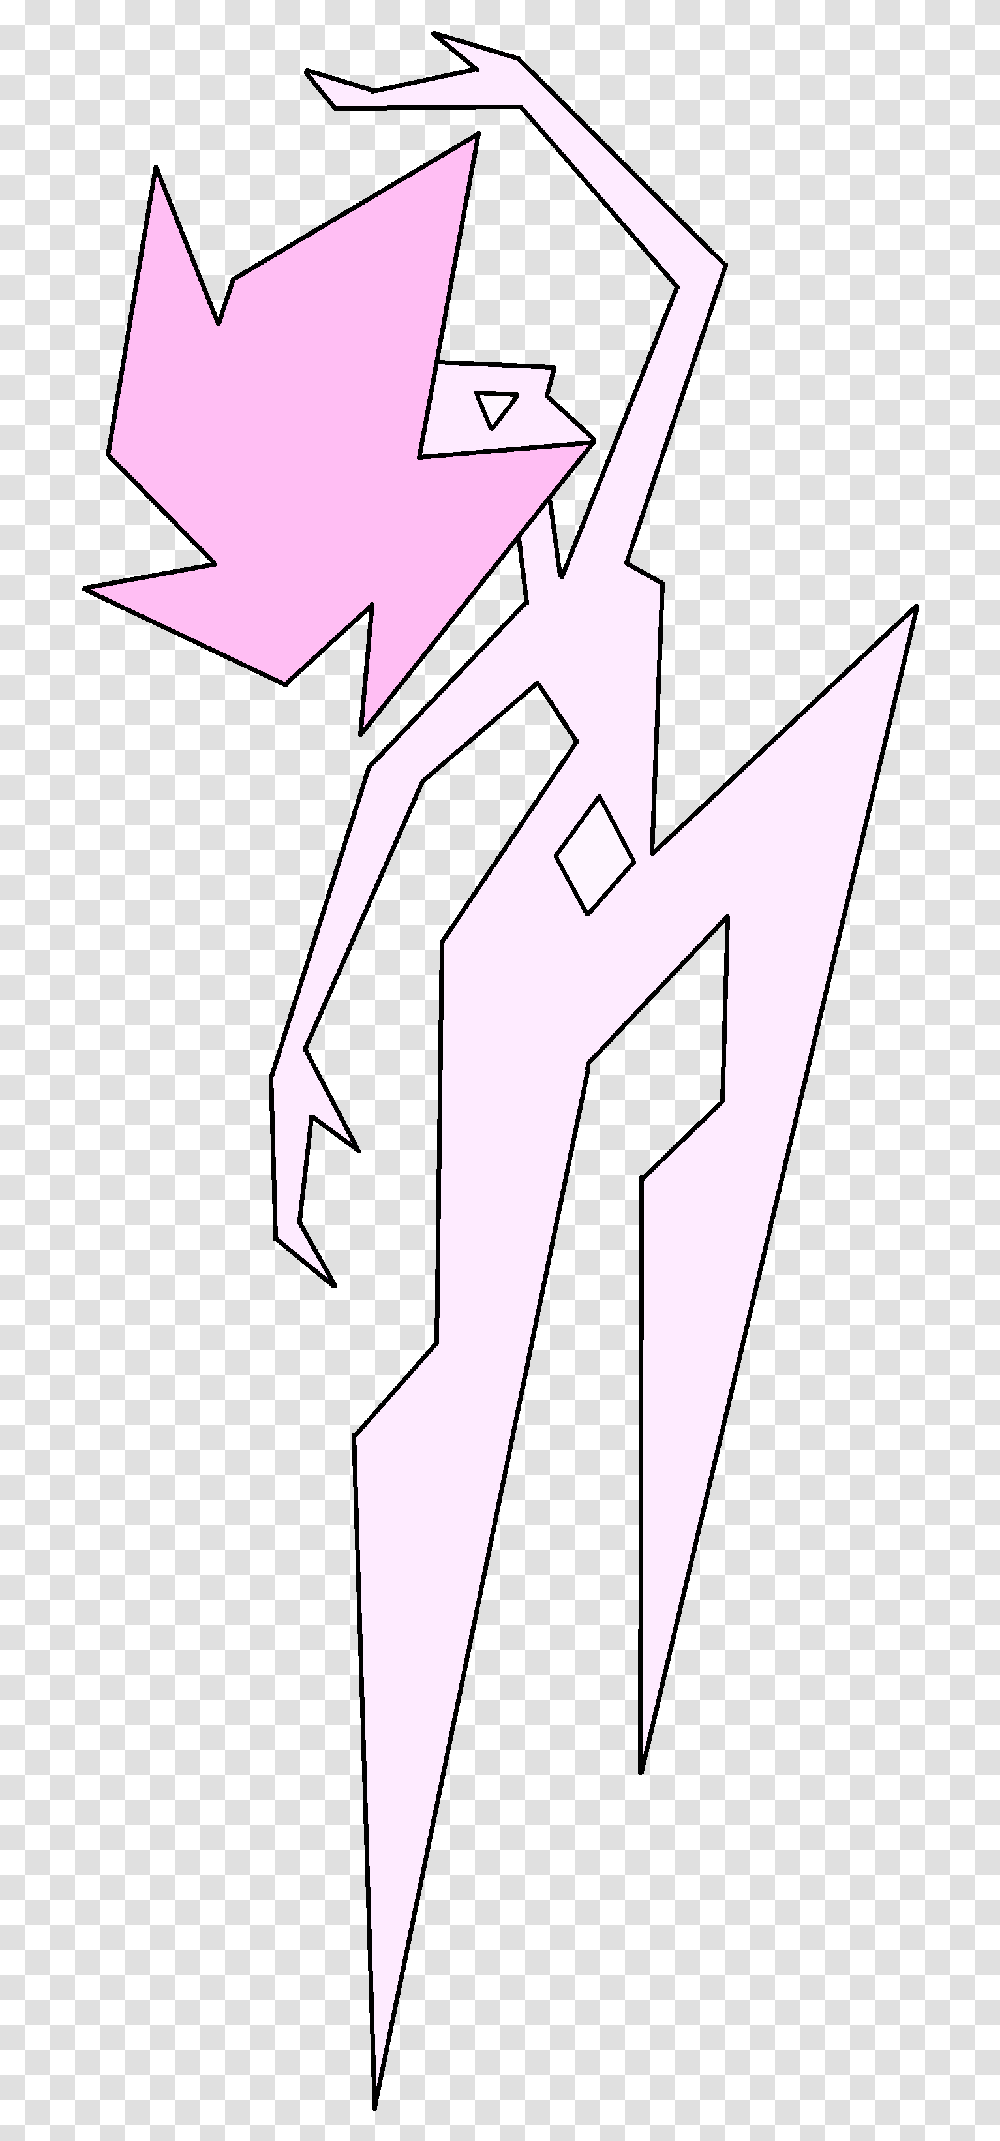 Thumb Image Steven Universe Pink Diamond Alone, Hand, Recycling Symbol, Stencil Transparent Png